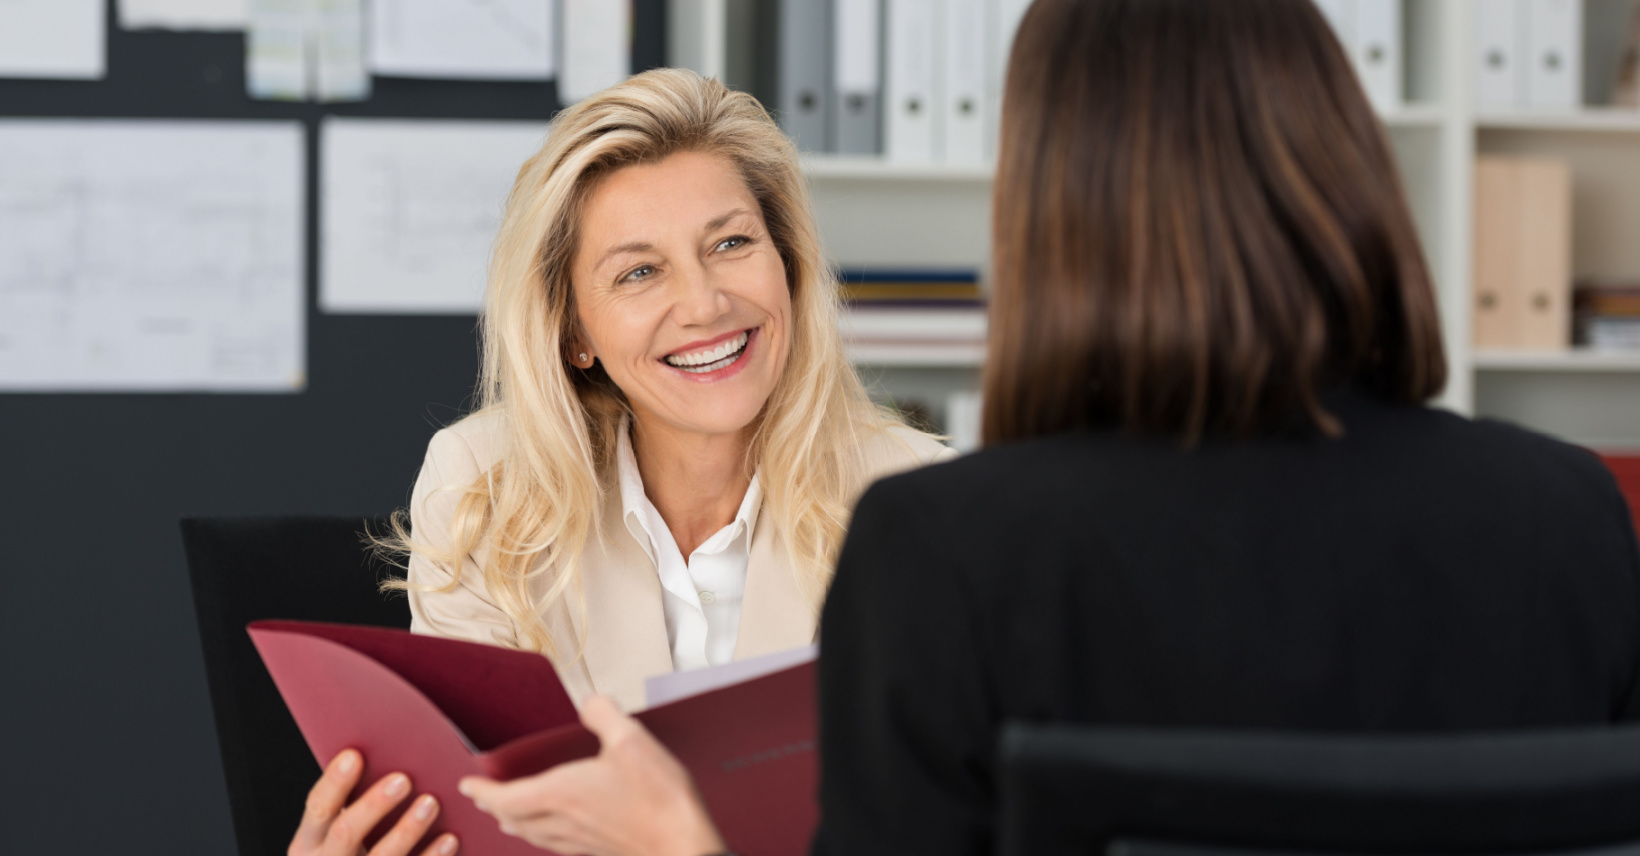 Mastering the Art of Job Interviews: Expert Tips on Answering Common Interview Questions